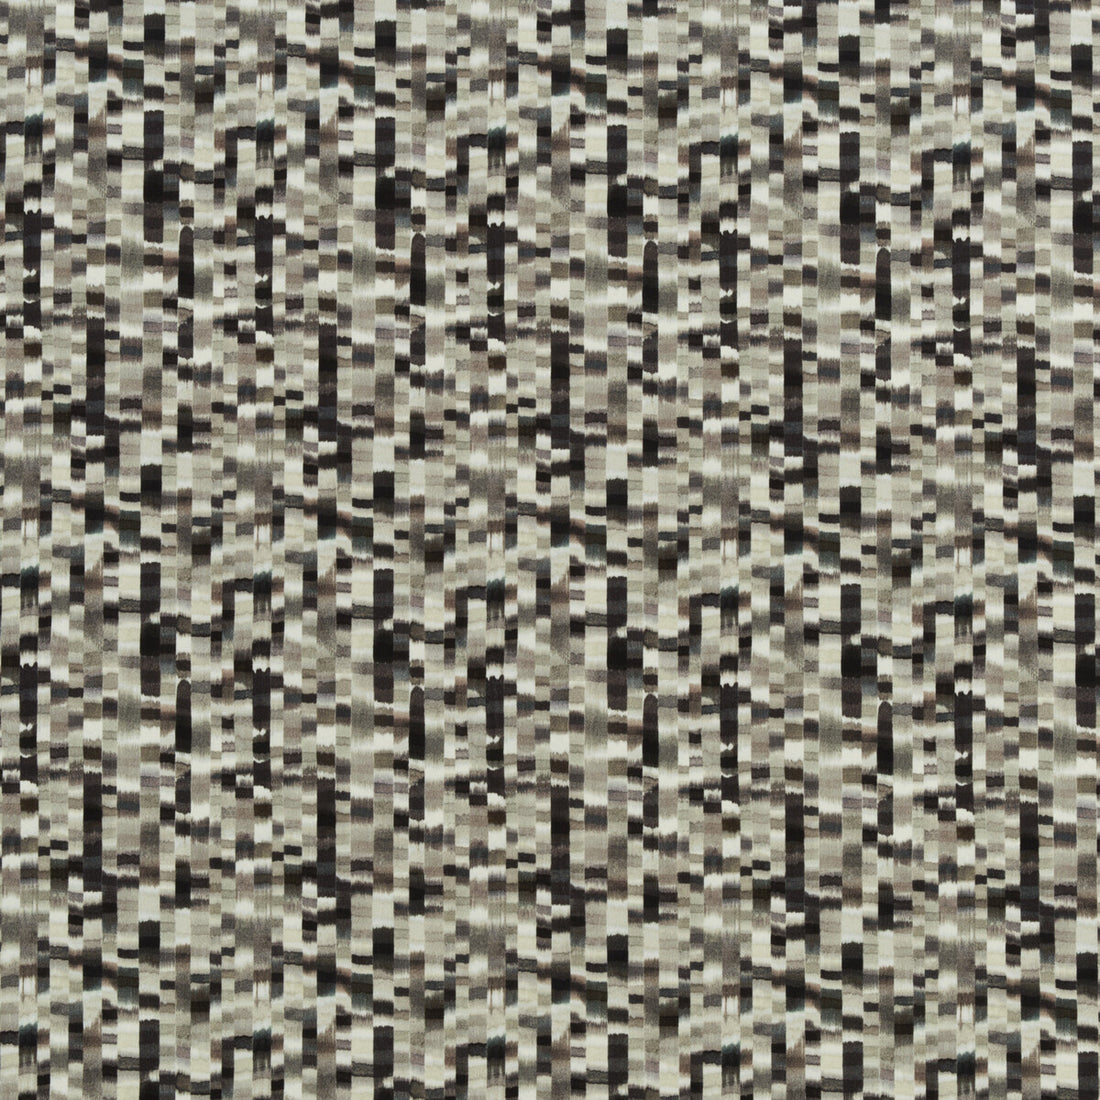 Saturn fabric in platinum/ebony color - pattern ED75015.2.0 - by Threads in the Odyssey collection